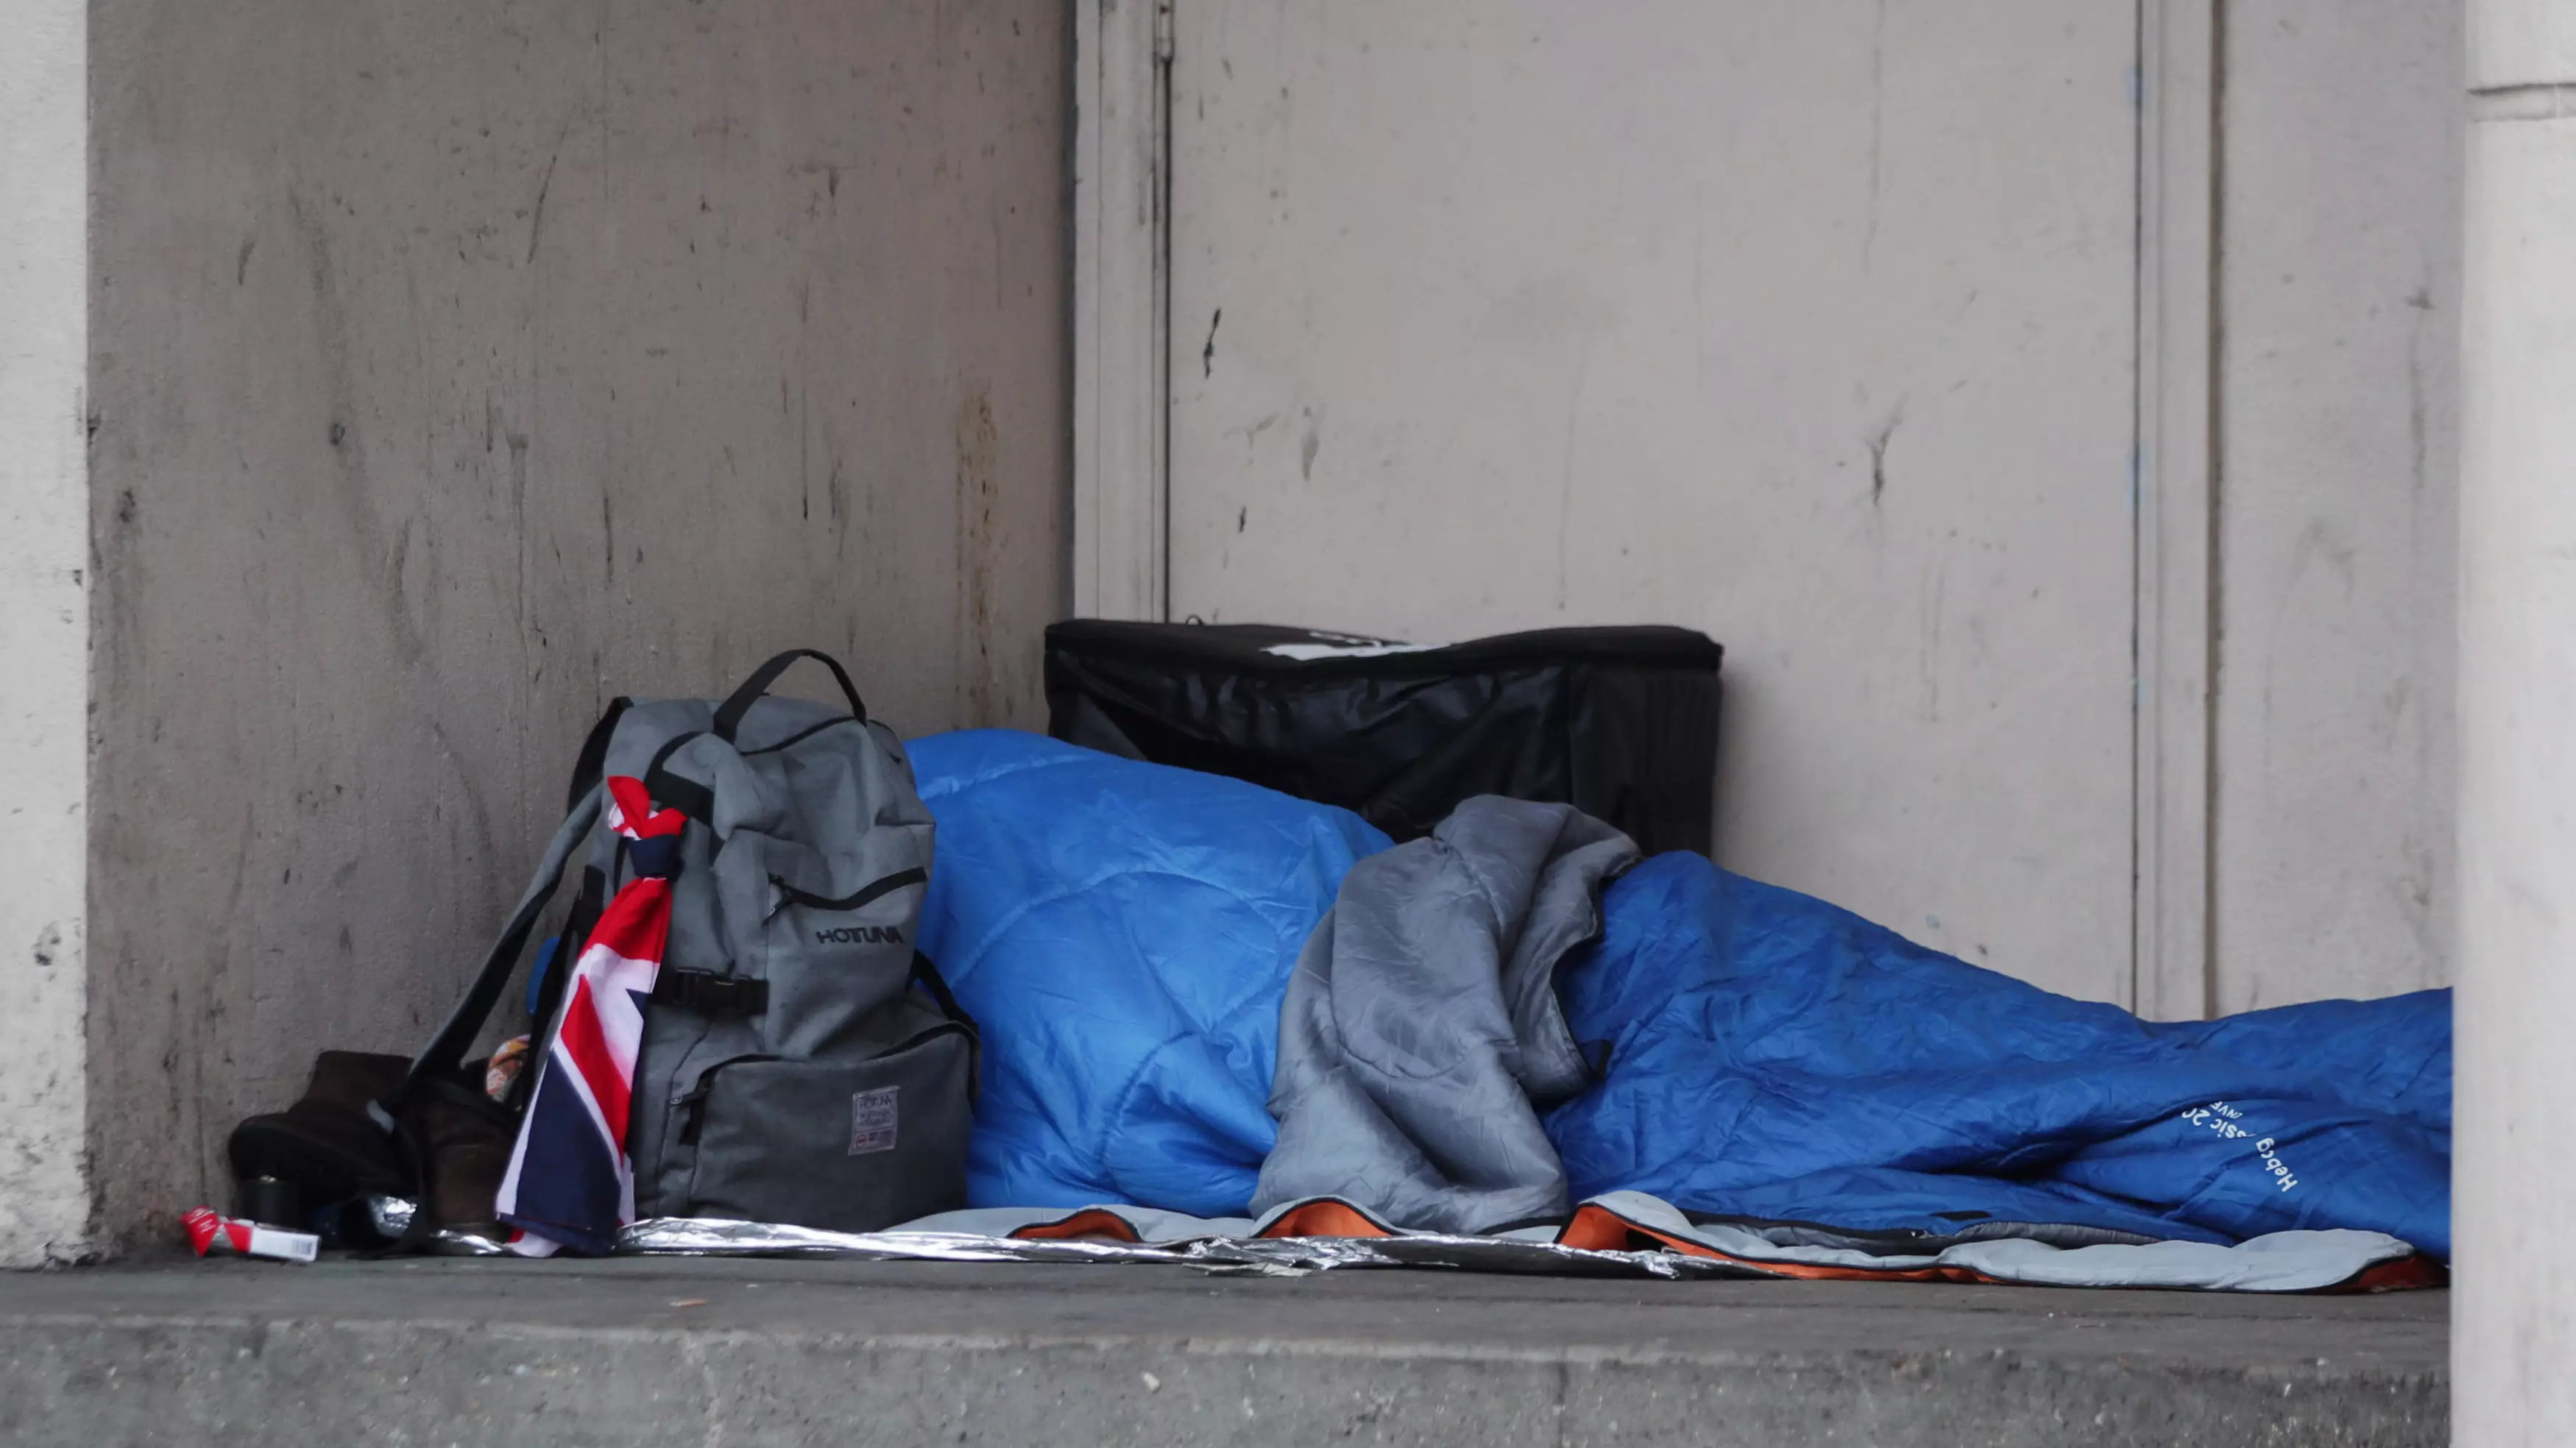 Manchester Fire Stations Opening Doors To Homeless People As Temperatures Drop